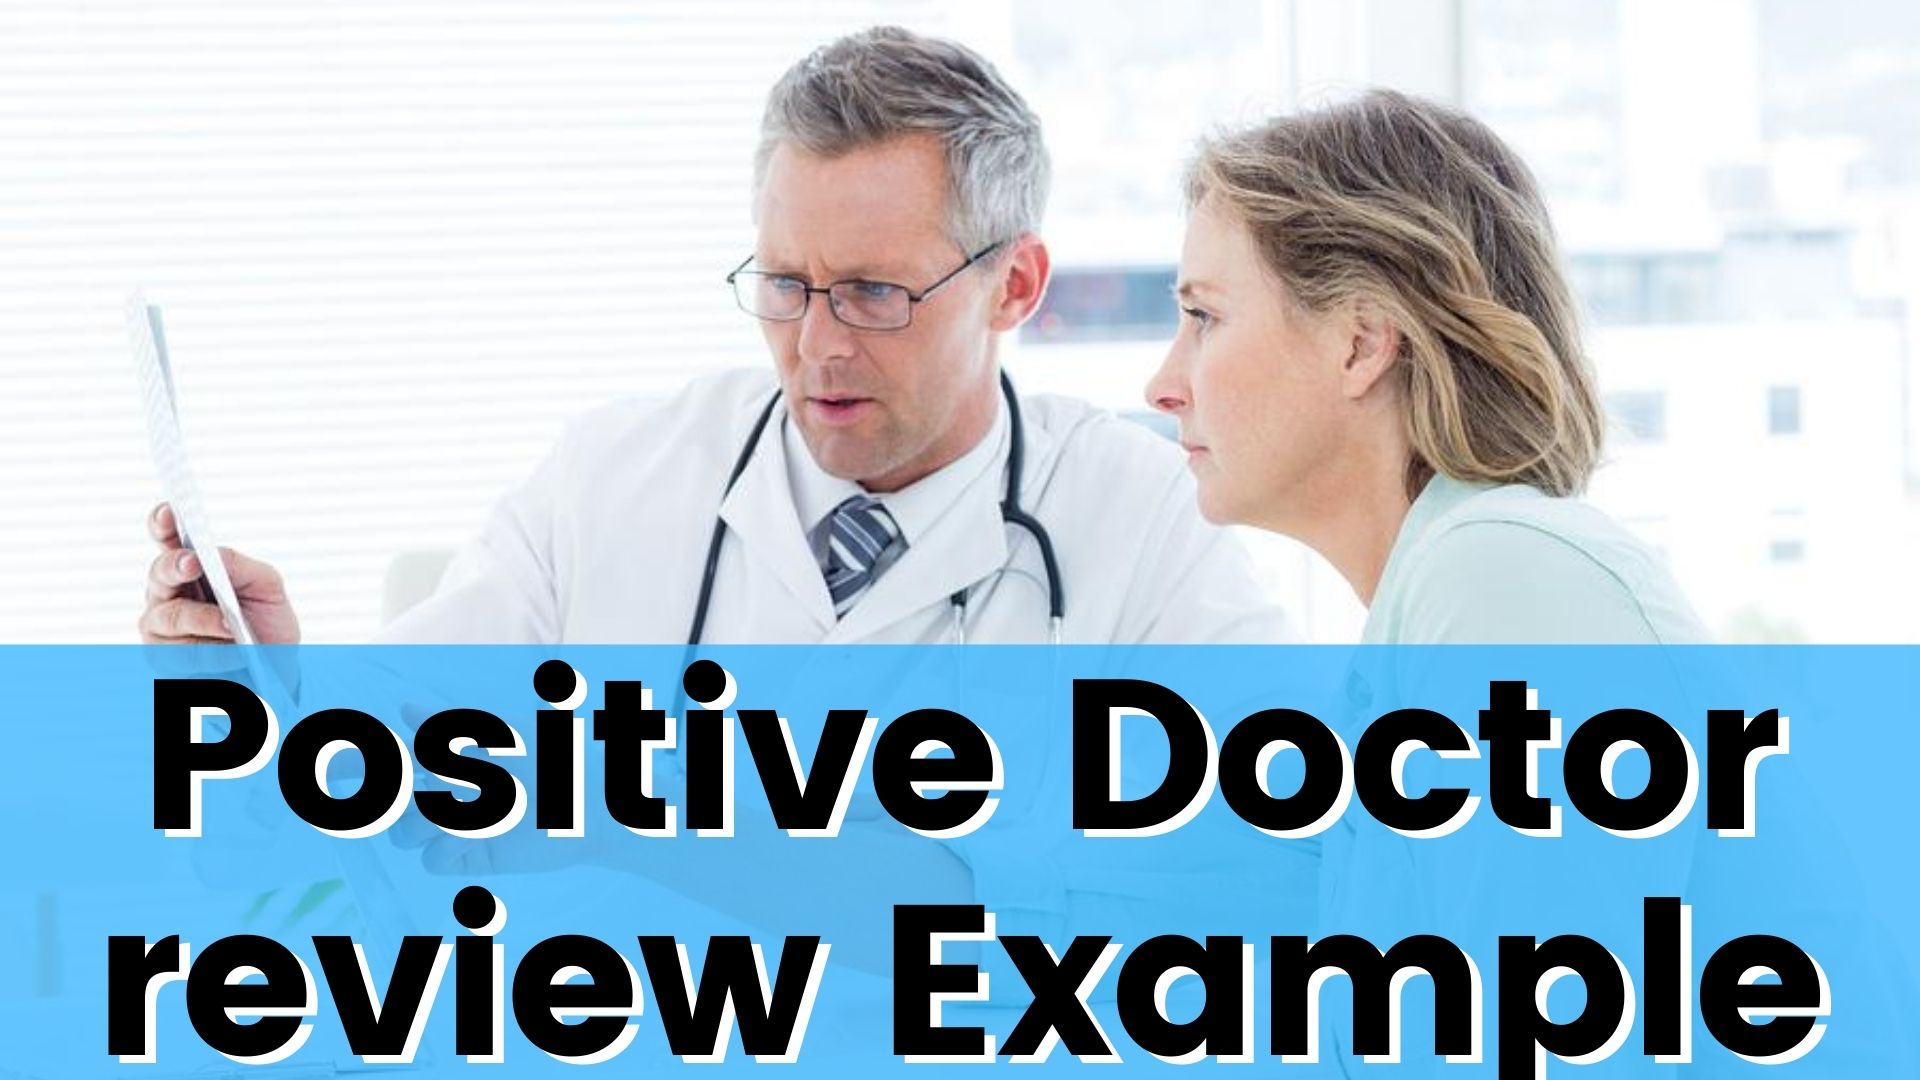 Positive Doctor review Examples